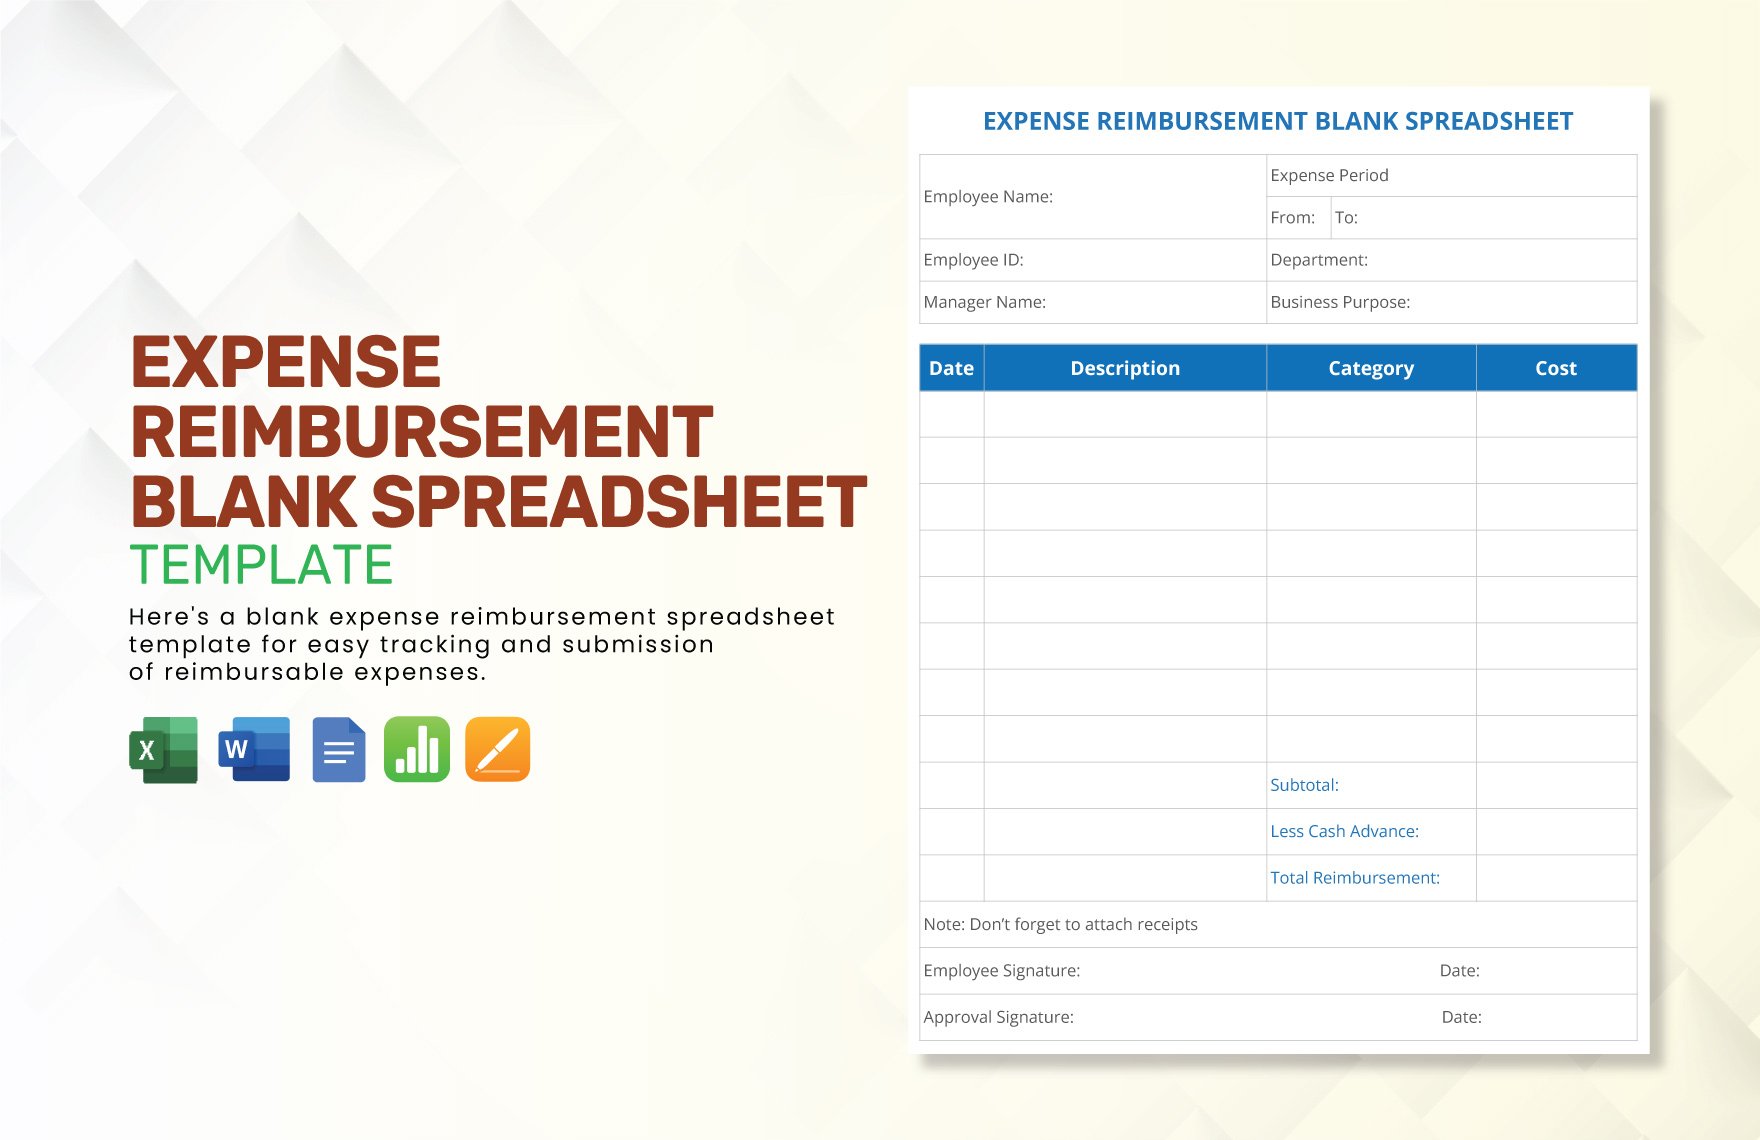 Expense Reimbursement Blank Spreadsheet Template in Word, Google Docs, Excel, Apple Pages, Apple Numbers